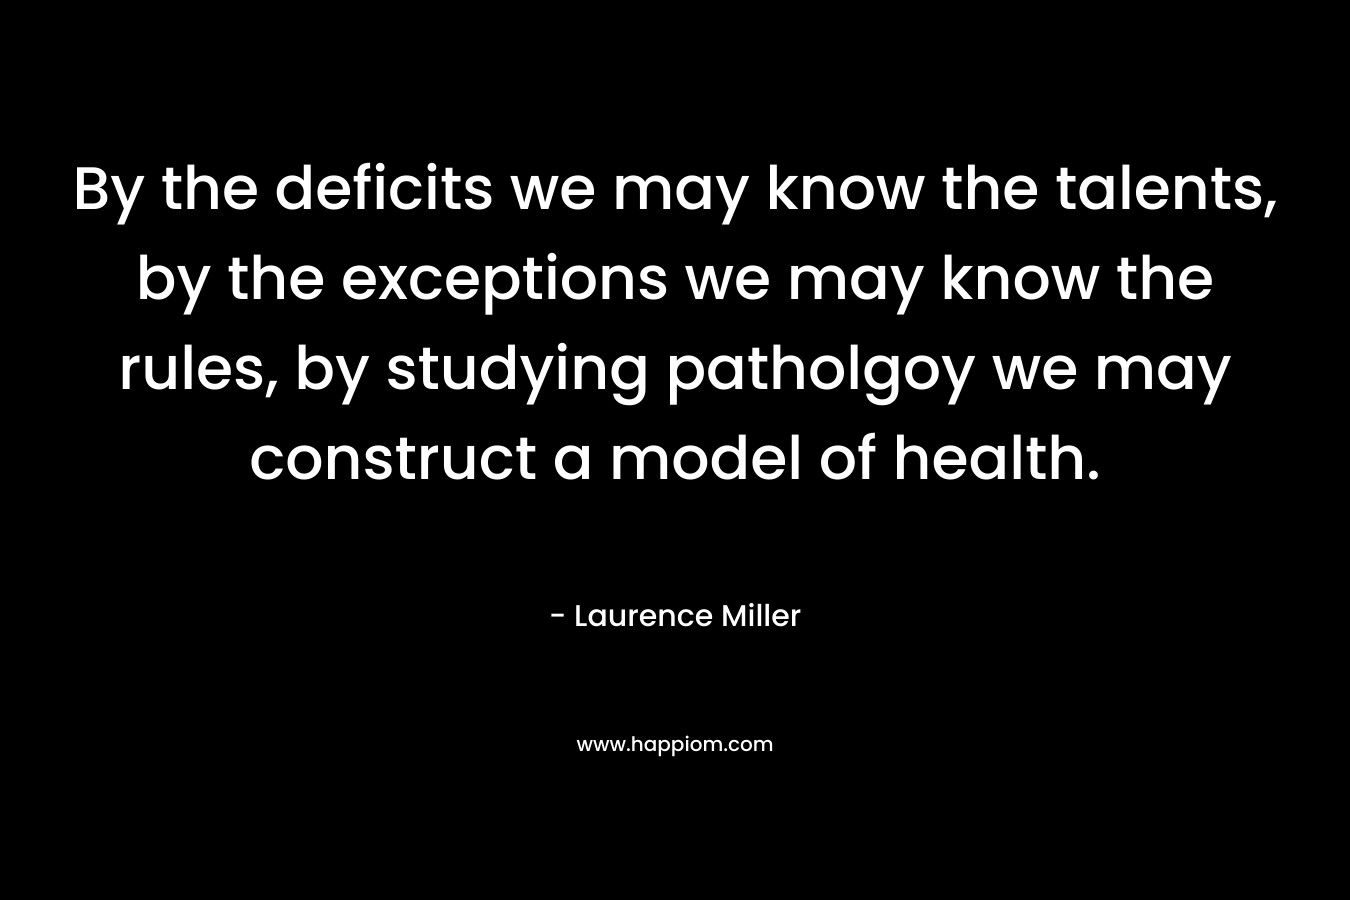 By the deficits we may know the talents, by the exceptions we may know the rules, by studying patholgoy we may construct a model of health.